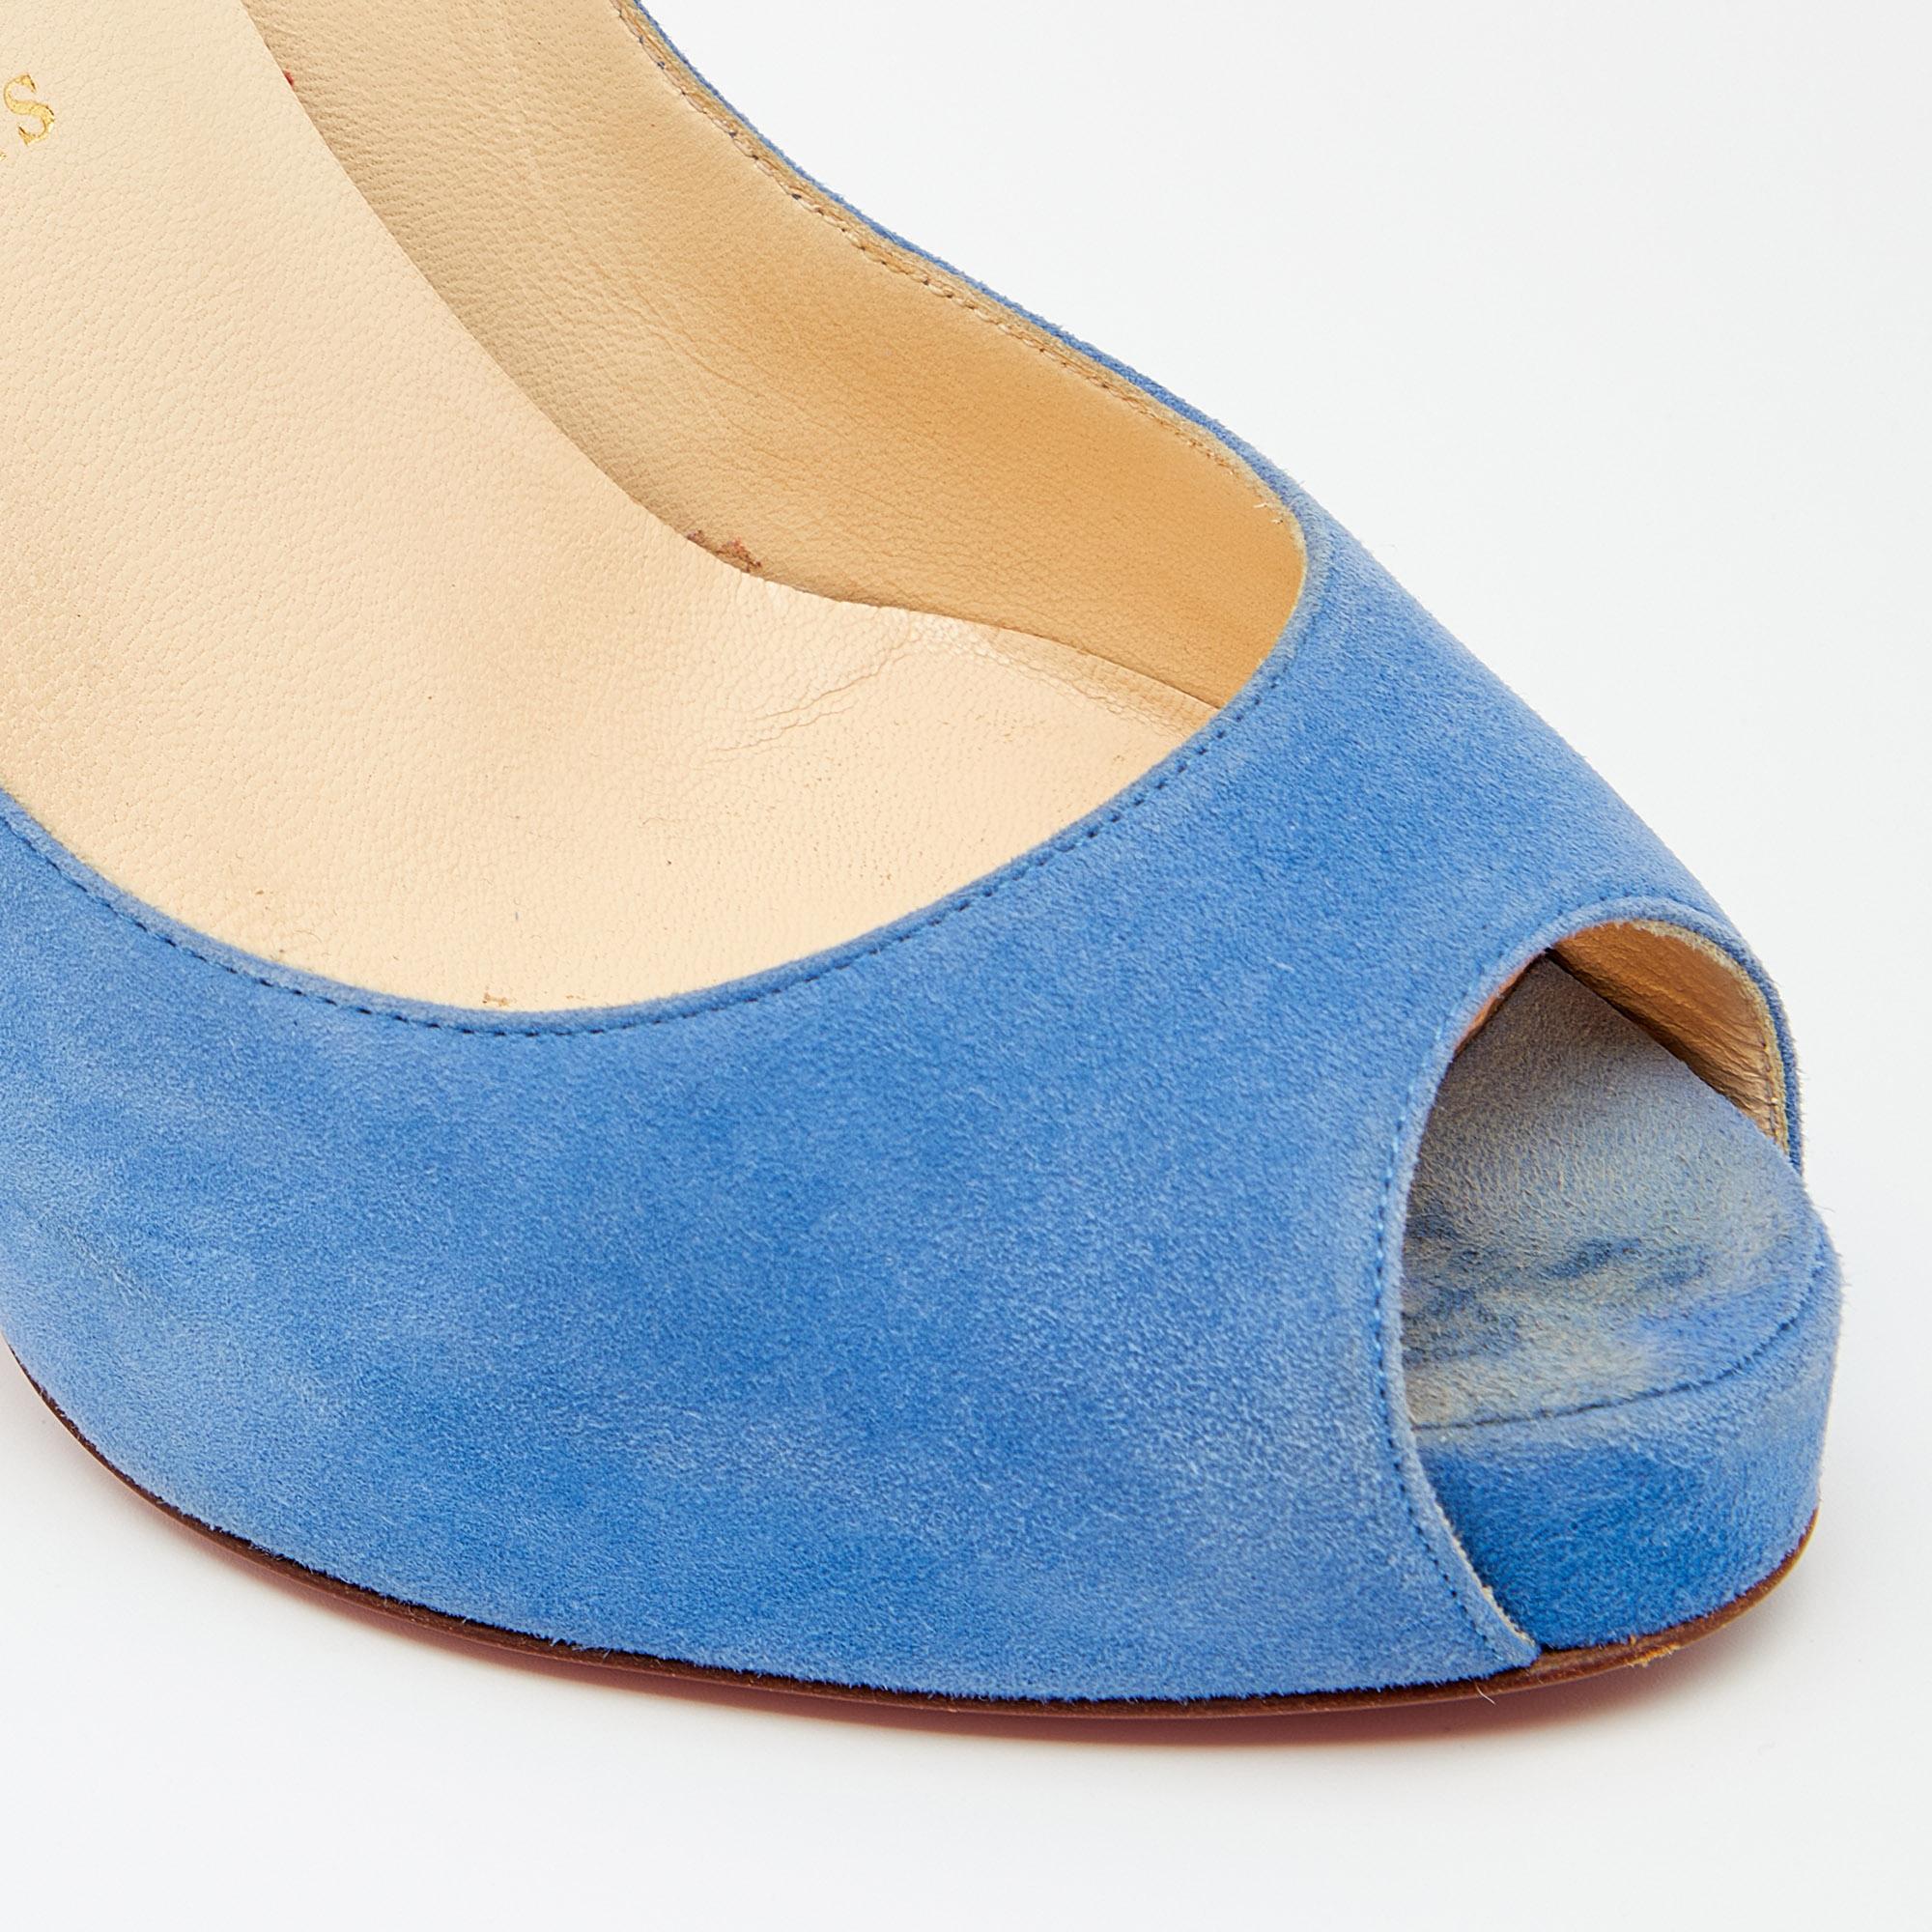 Christian Louboutin Blue Suede New Very Prive Peep Toe Pumps Size 36.5 In Good Condition For Sale In Dubai, Al Qouz 2